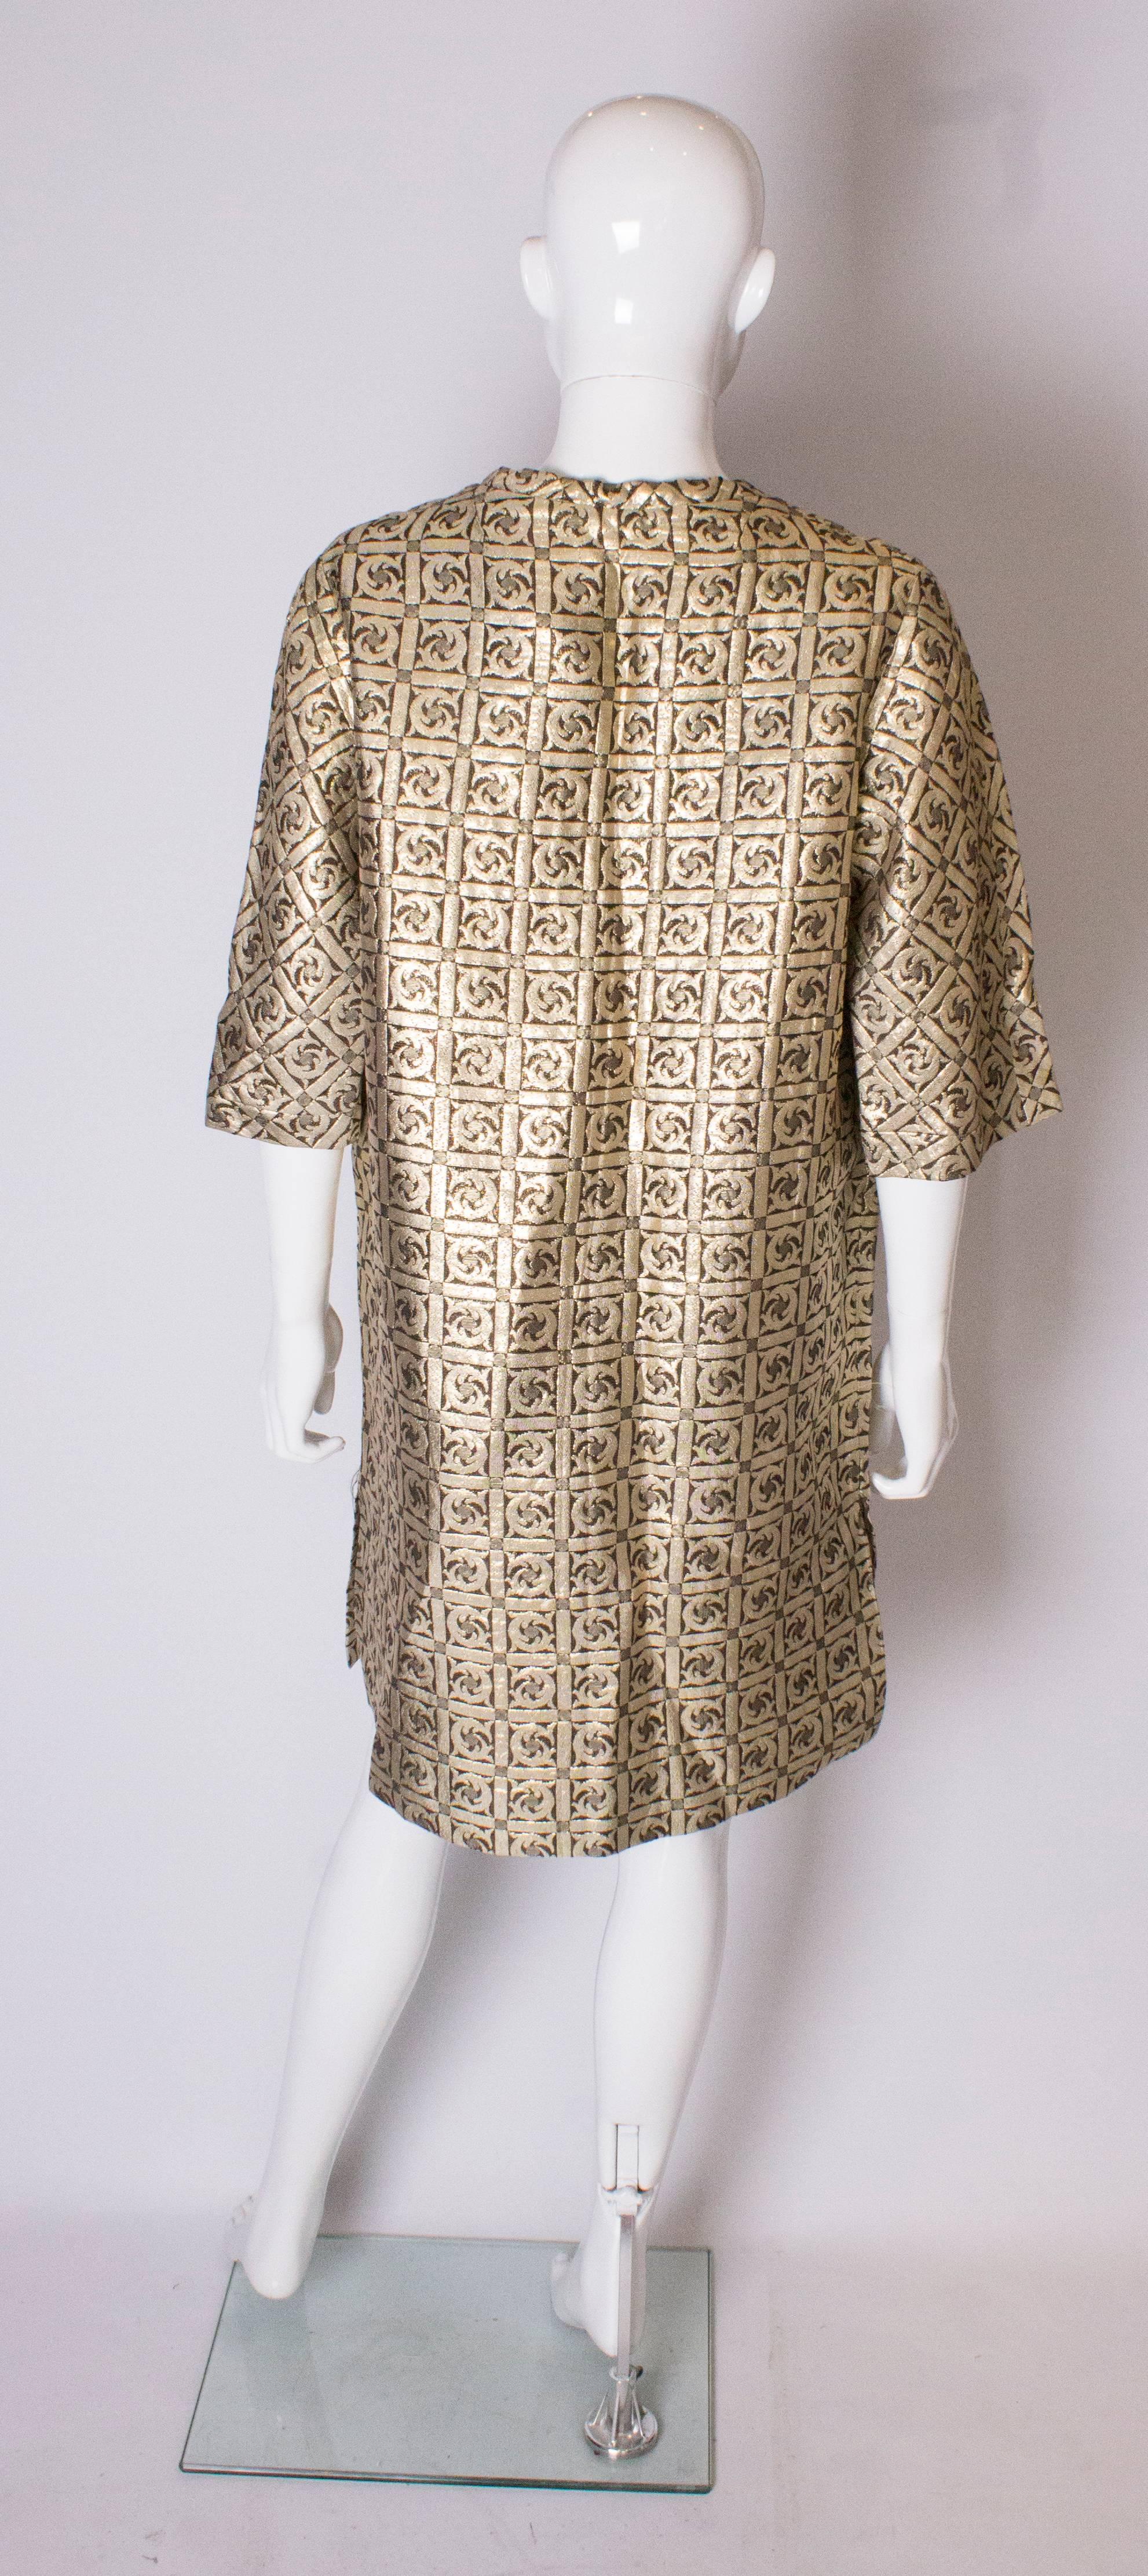 A Vintage 1970s Gold Brocade Tunic Dress  /Top For Sale 2